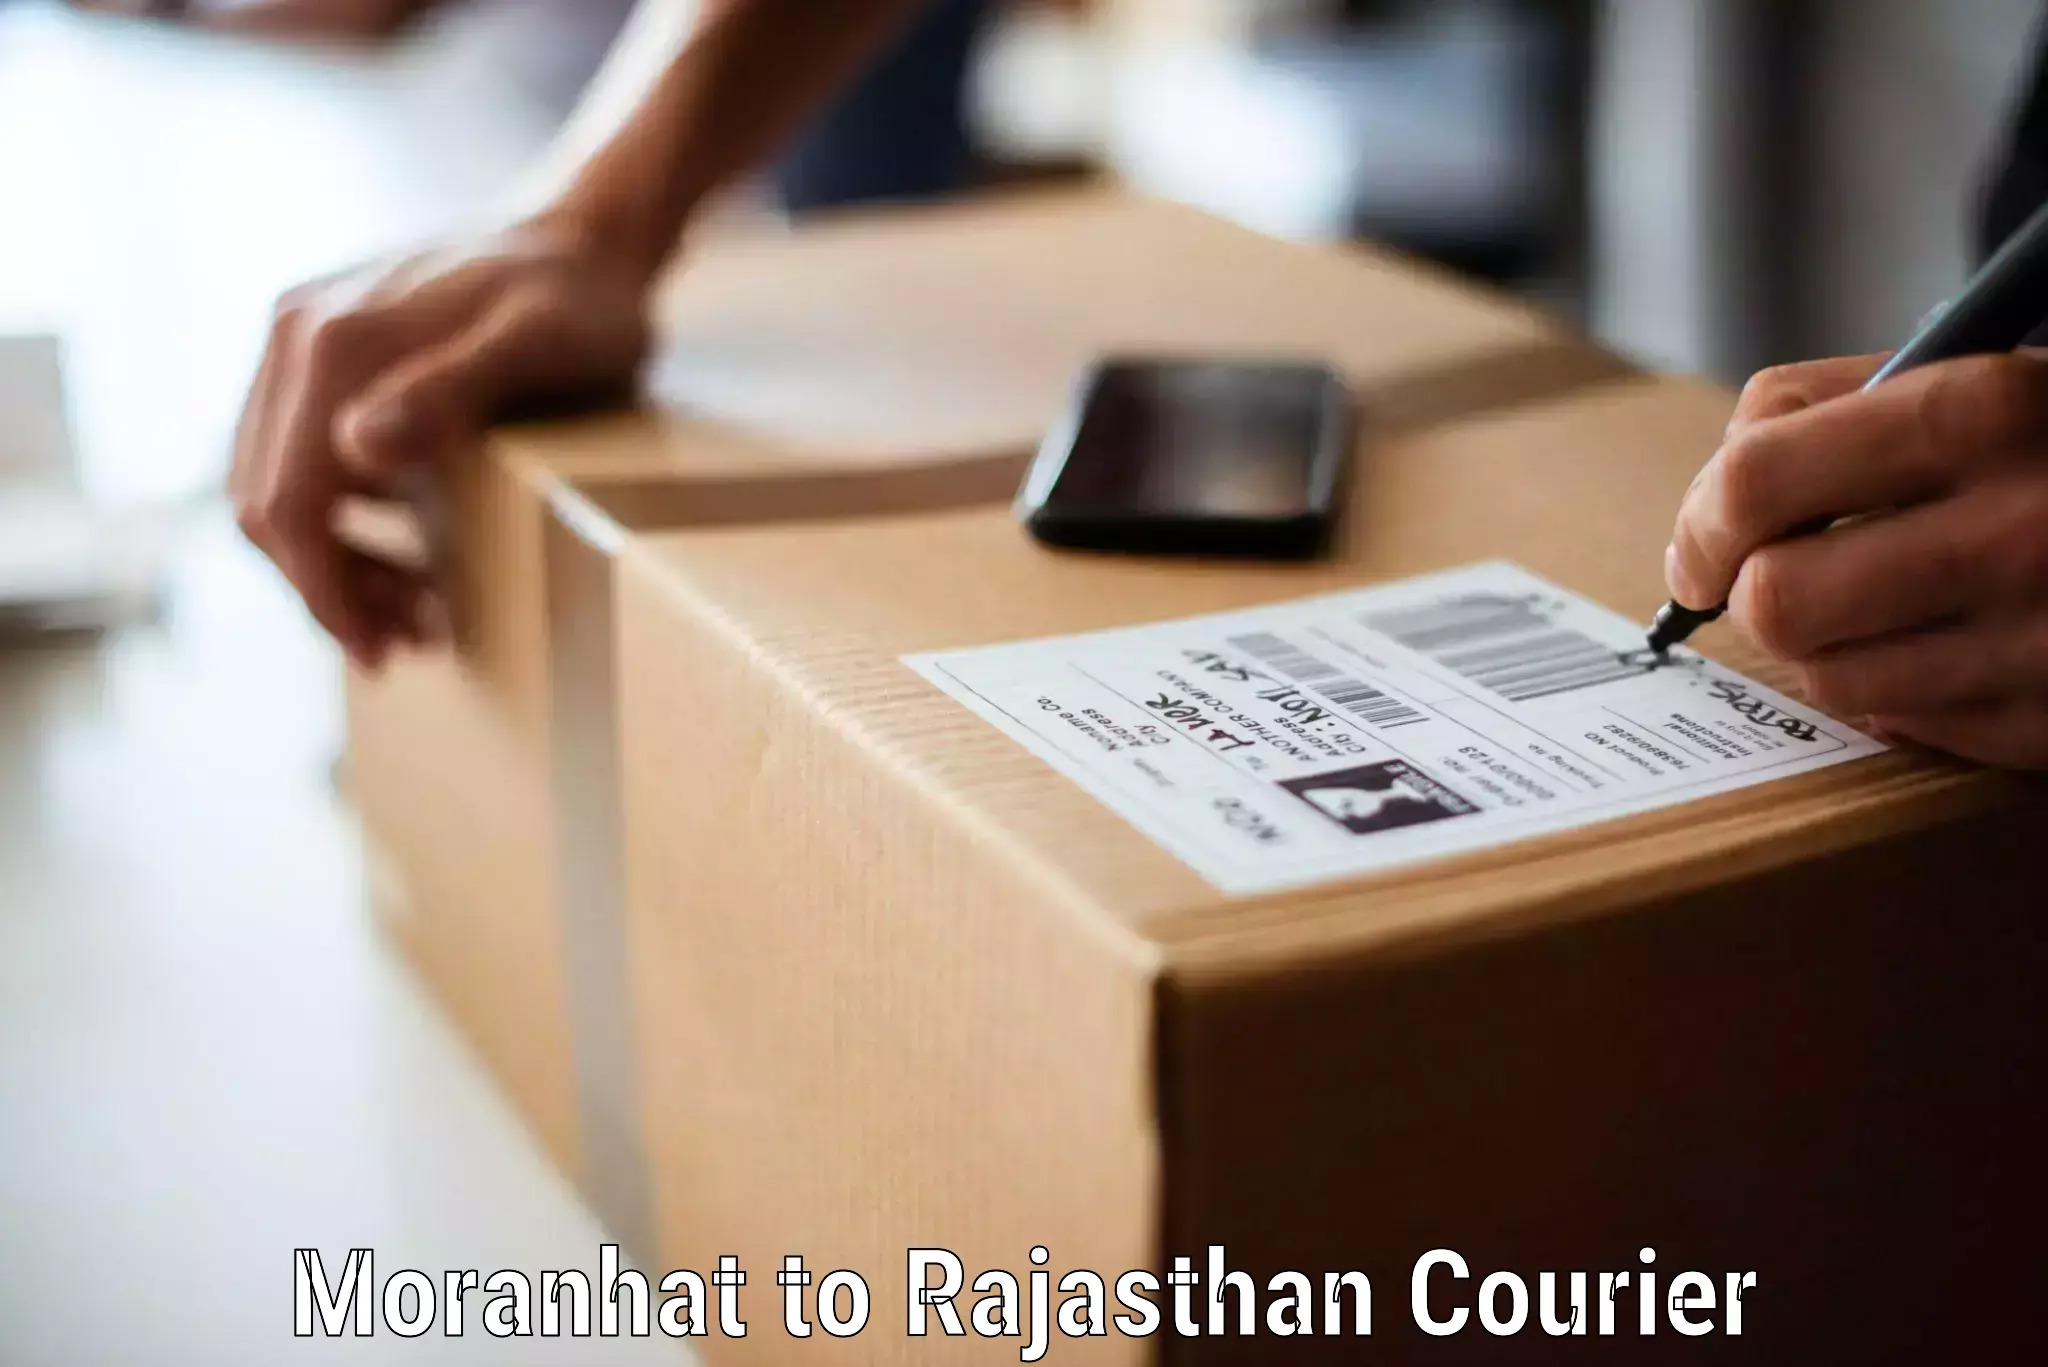 Furniture delivery service Moranhat to Udaipur